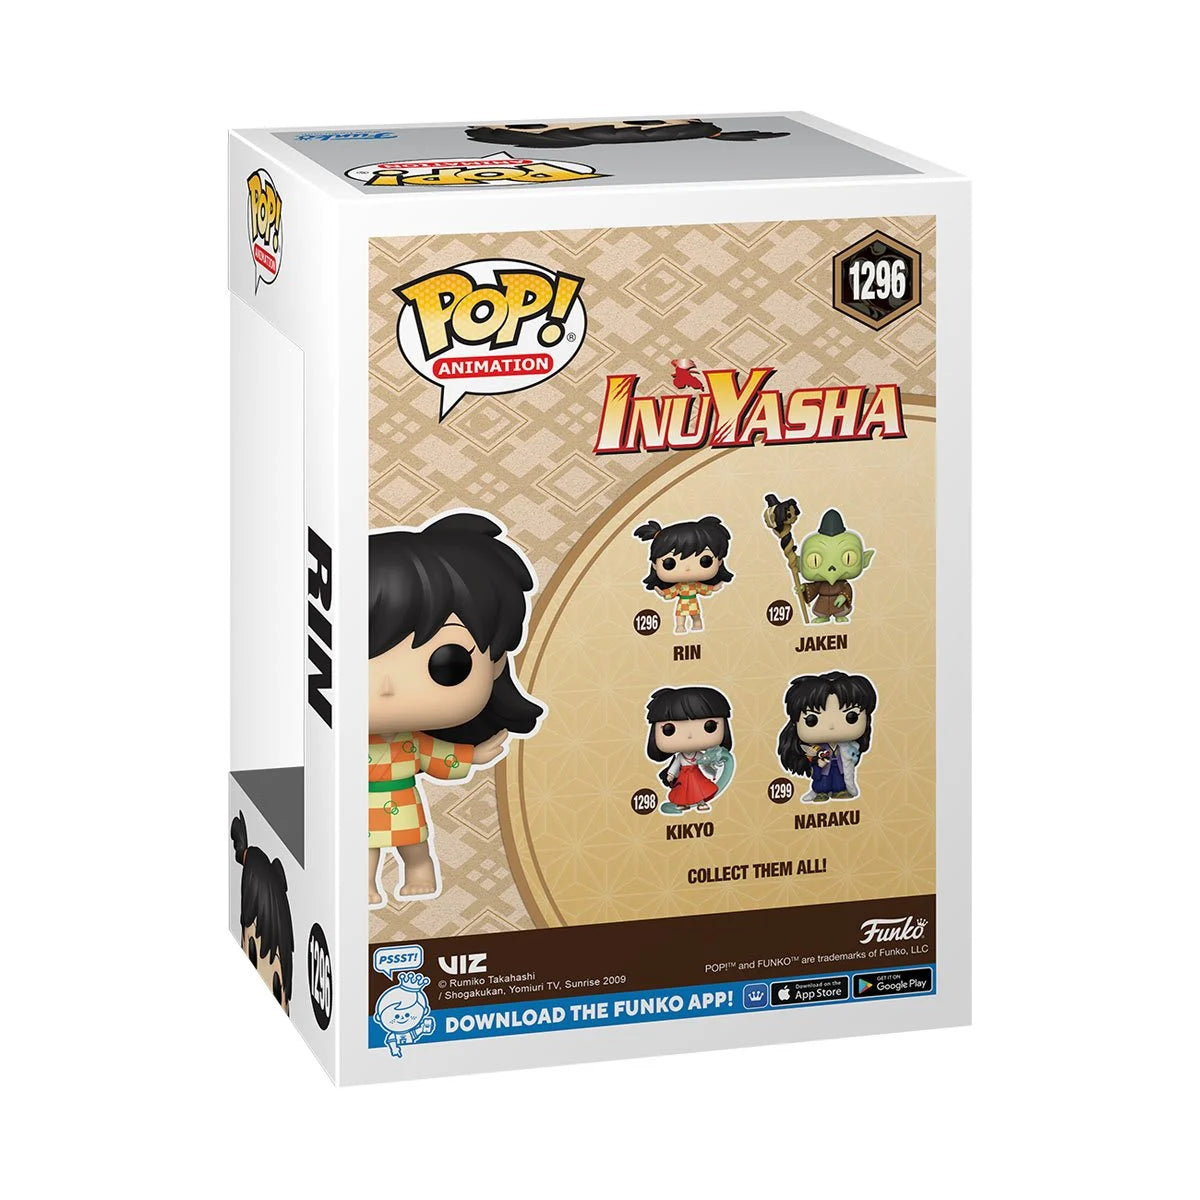 Inuyasha Rin Pop! Vinyl Figure #1296 in a box back view - heretoserveyou